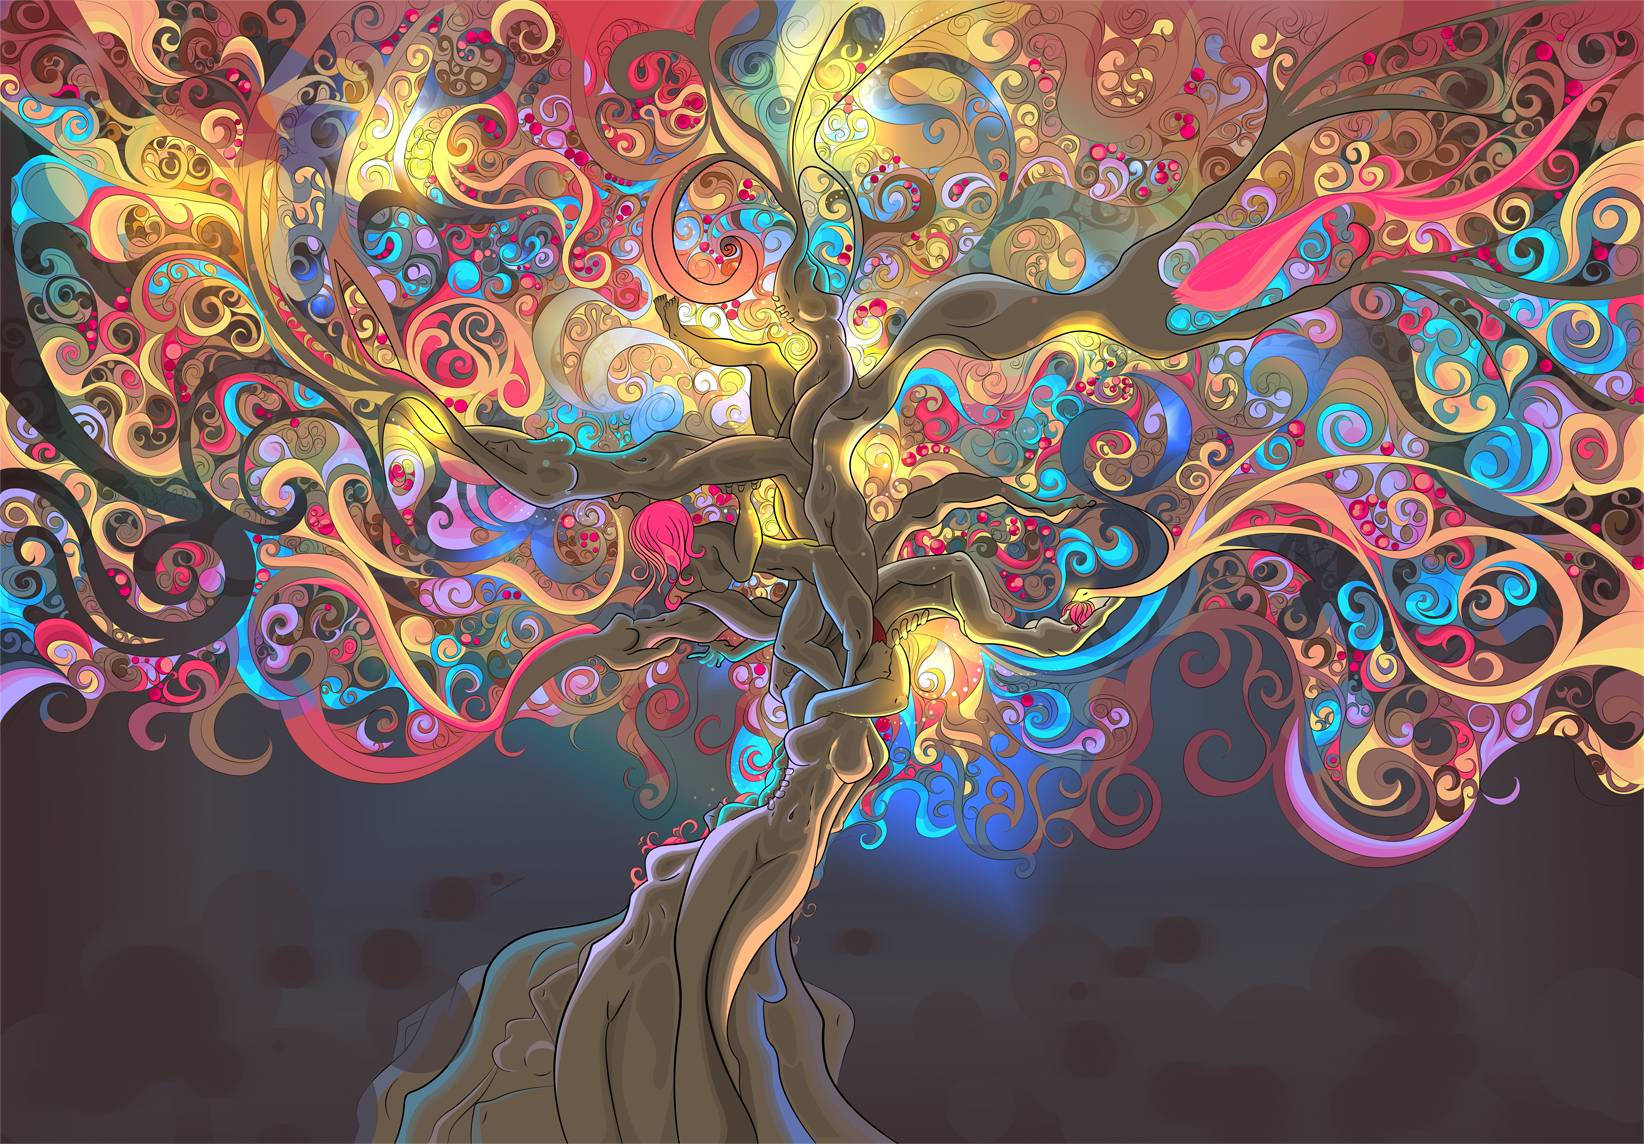 A psychedelic wallpaper art of intertwined female bodies forming tree.